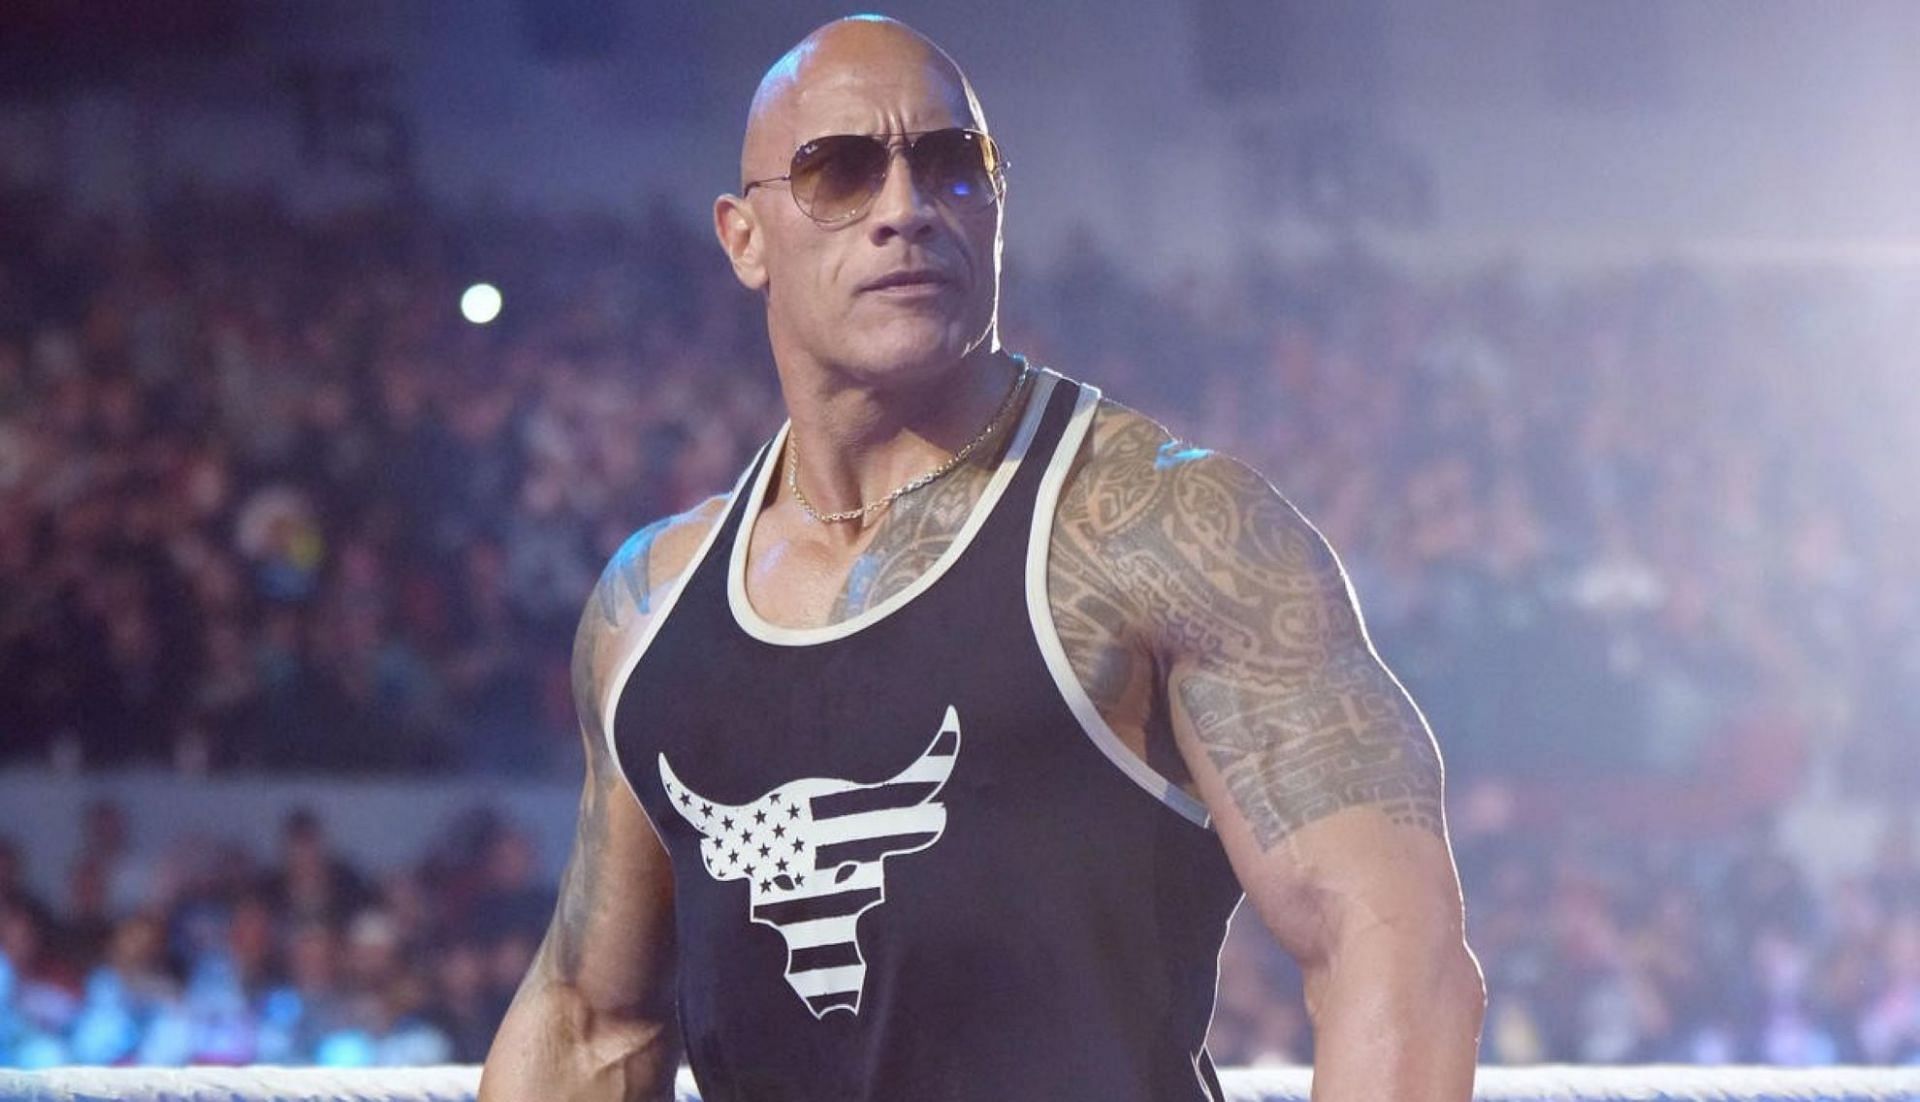 The Rock is back on the minds of WWE fans.